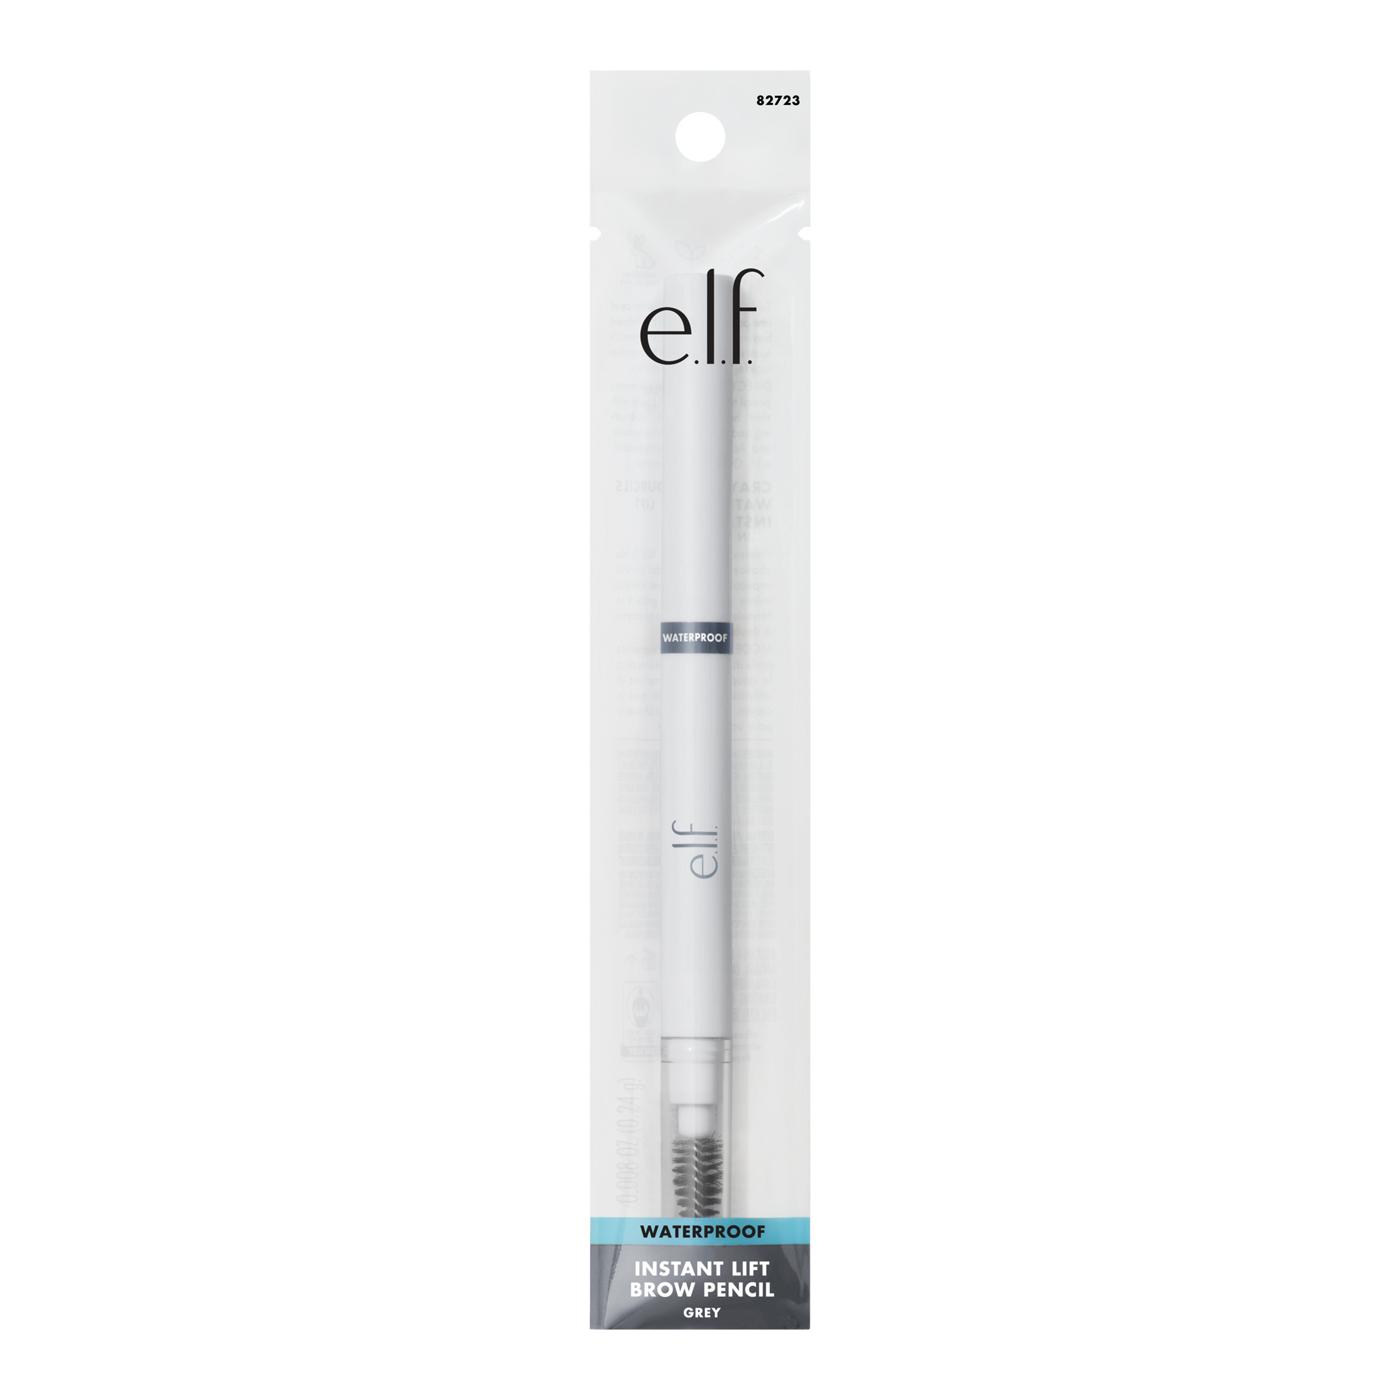 e.l.f. Instant Lift Brow Pencil Waterproof - Grey ; image 1 of 2